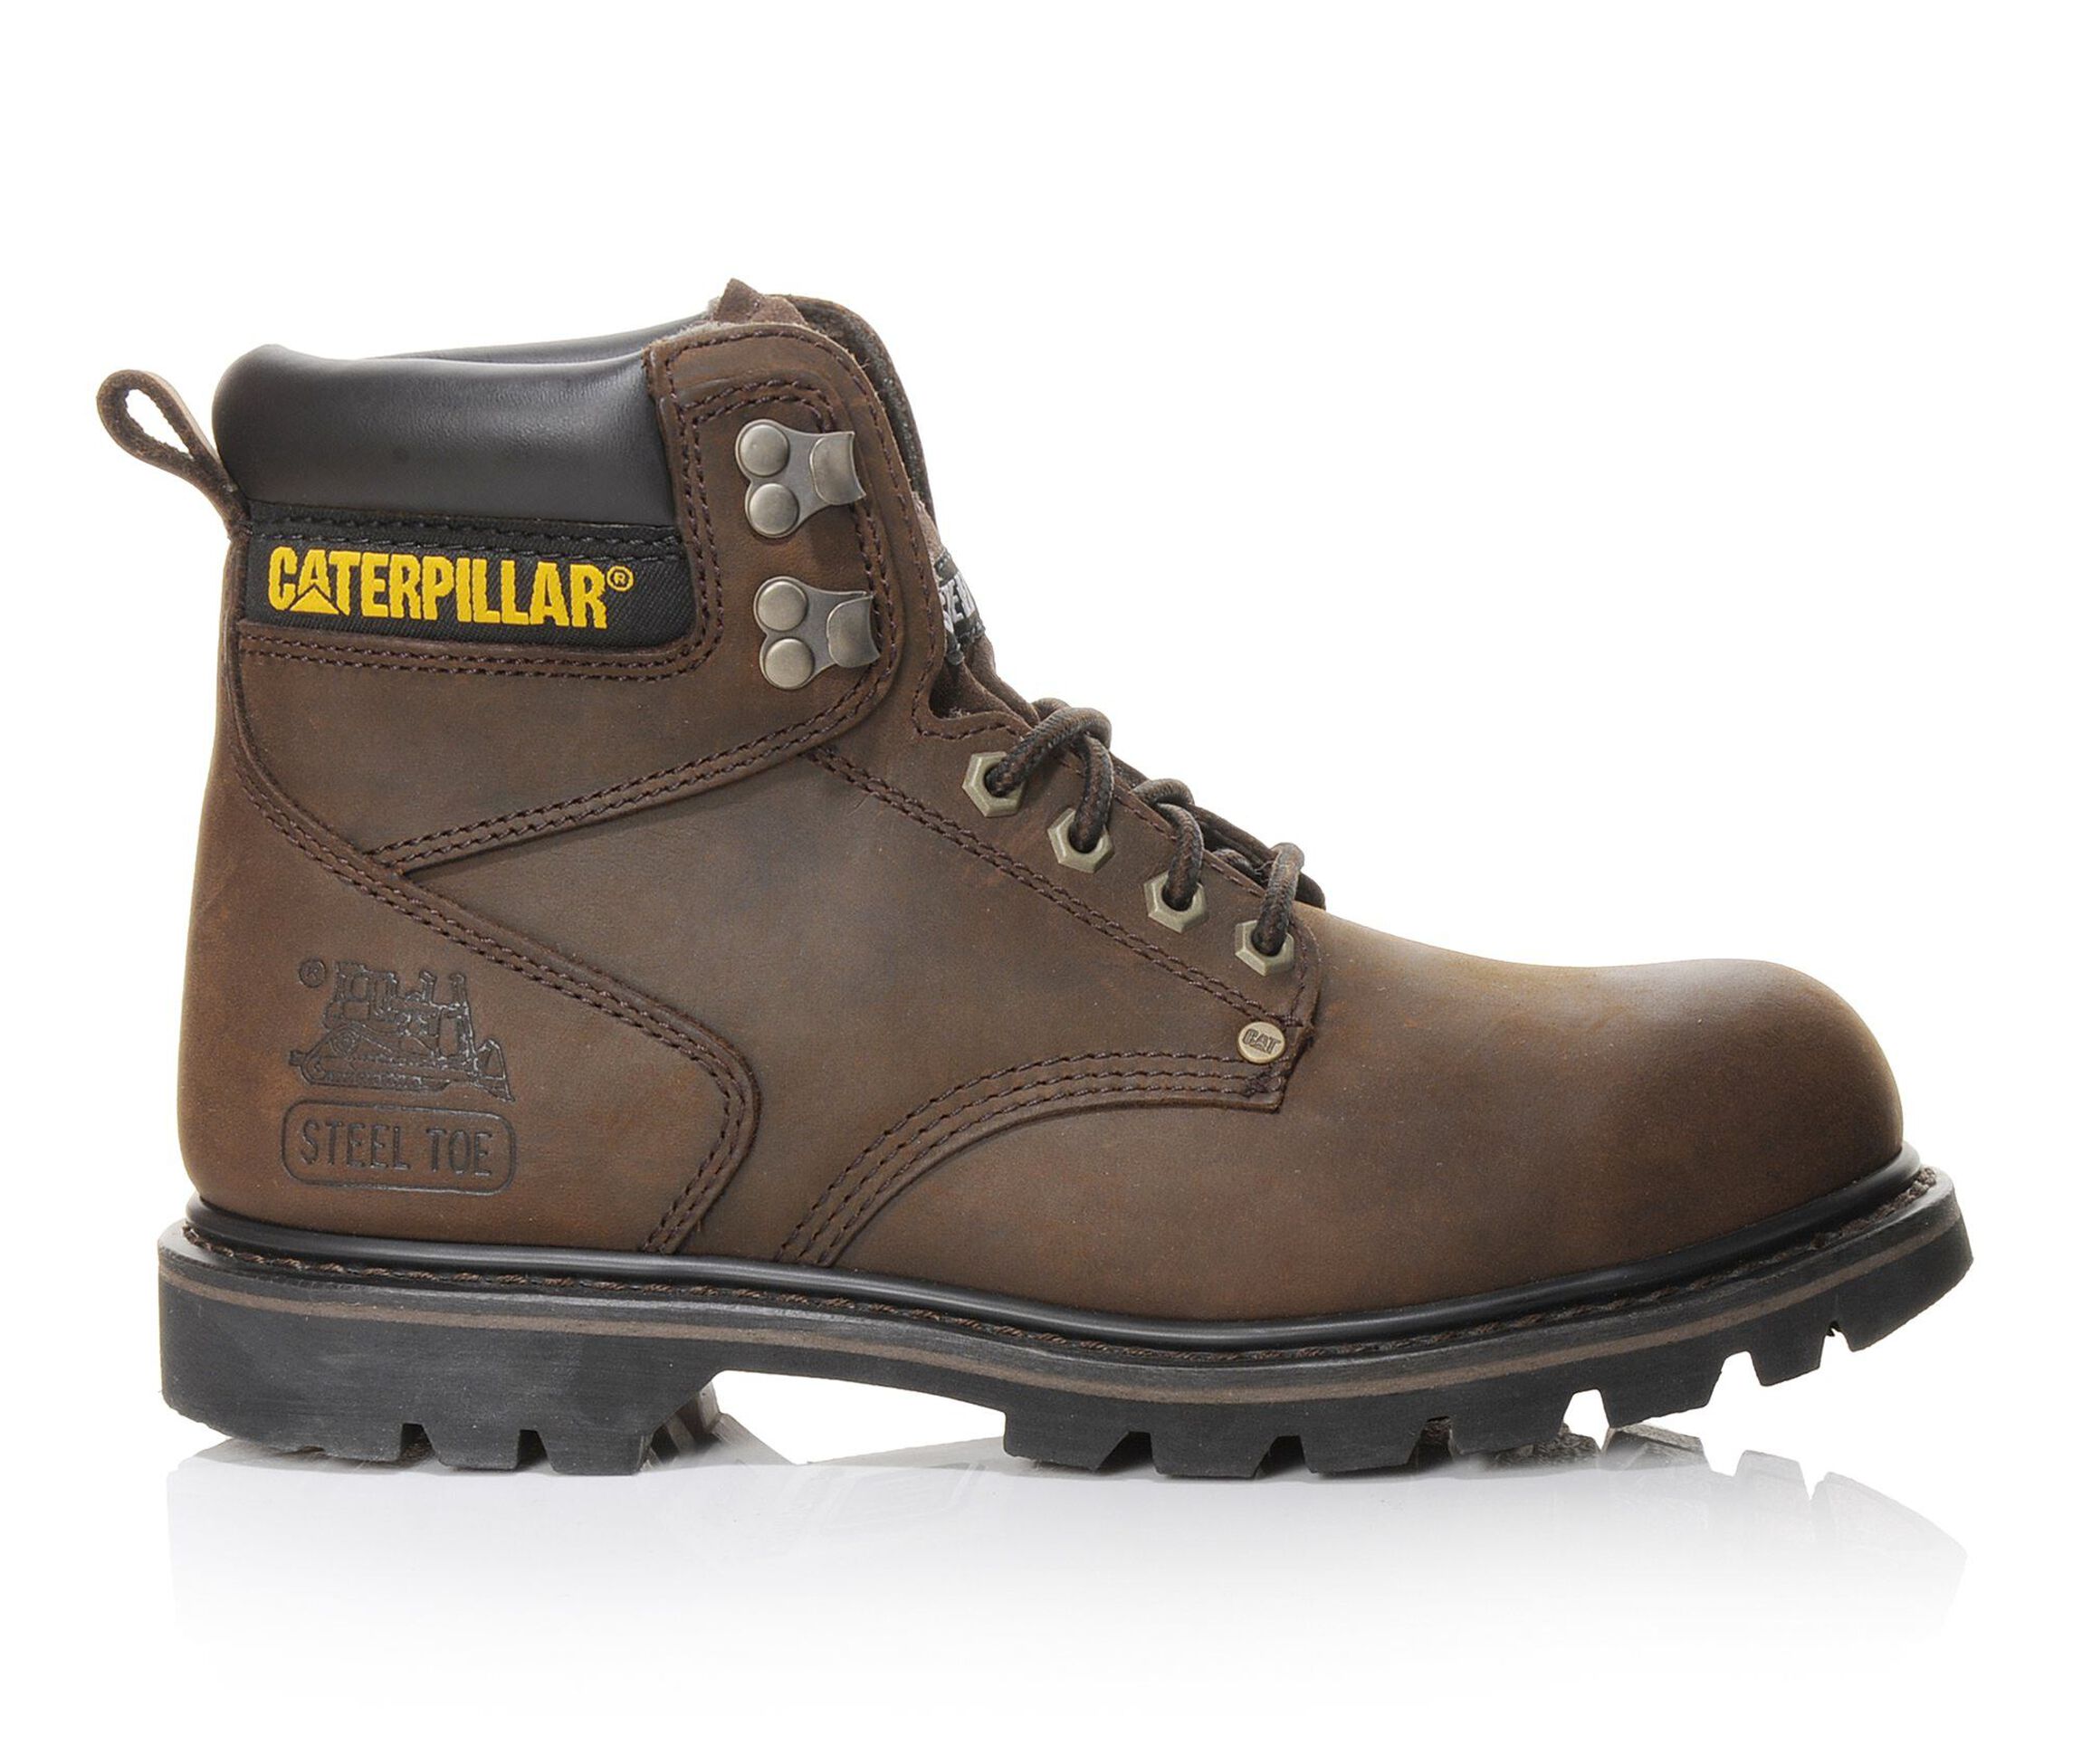 Caterpillar Second Shift 6 In Steel Toe Men's Boots (Brown Leather)